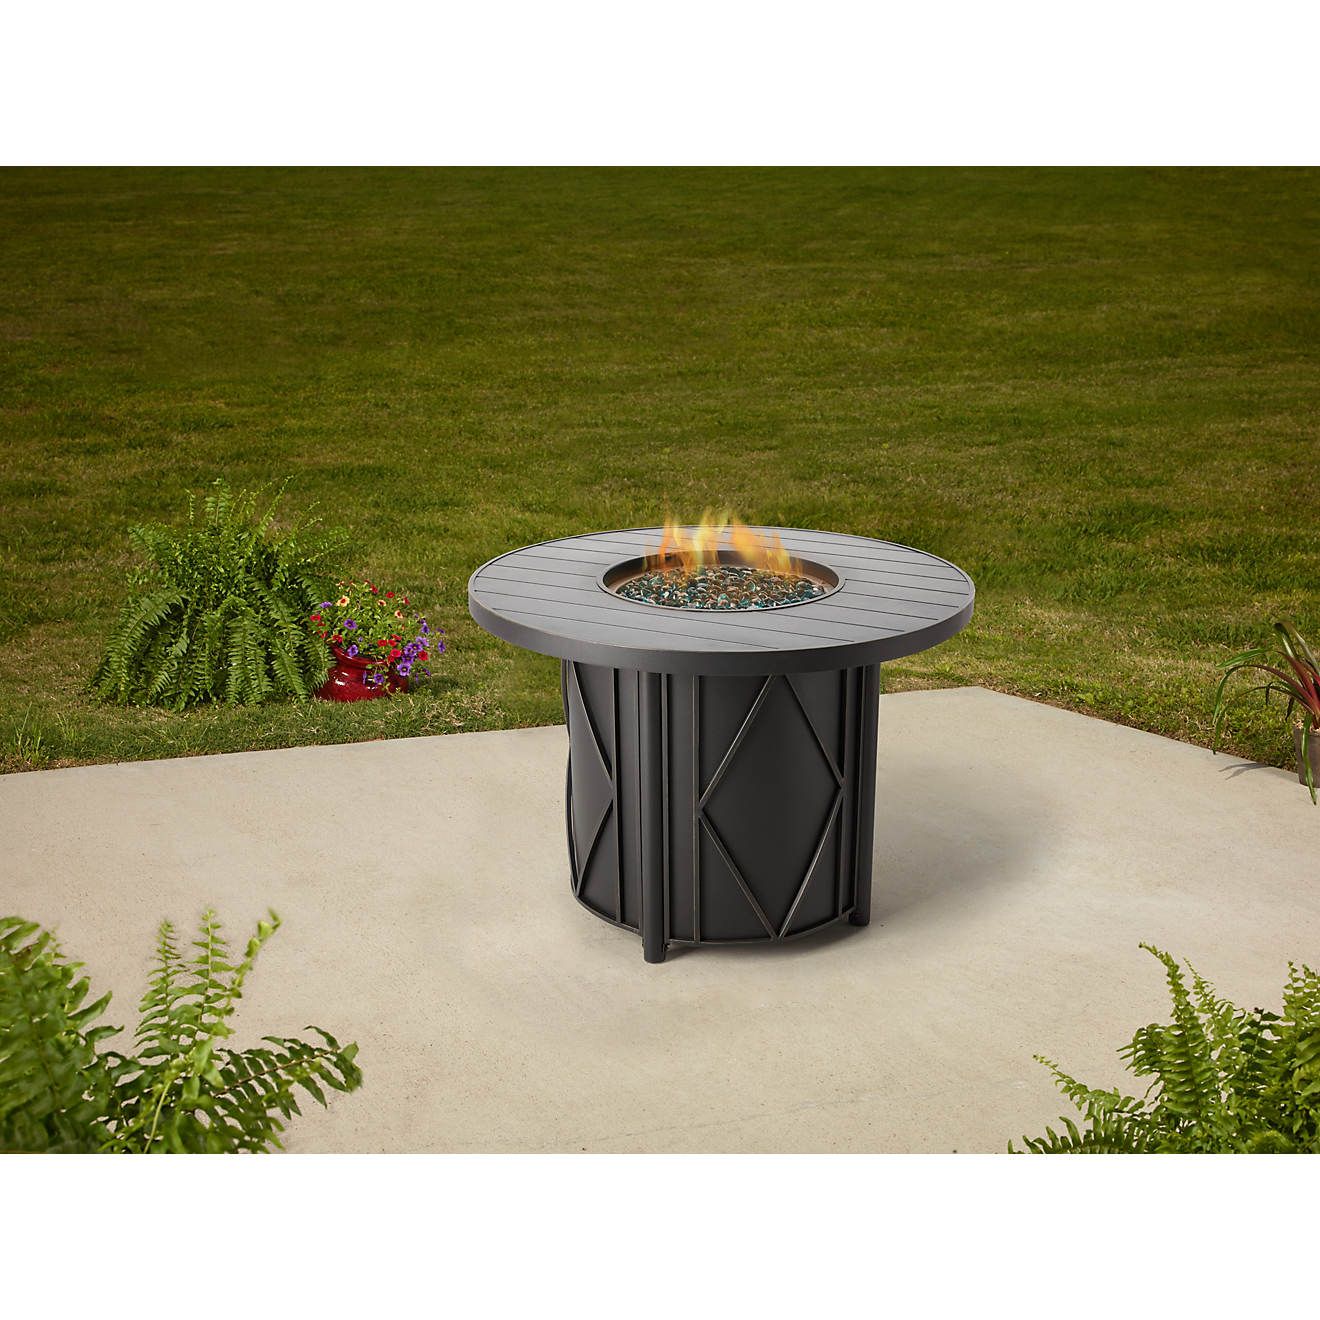 Mosaic Kingsland Round Top Gas Fire Pit | Academy | Academy Sports + Outdoors